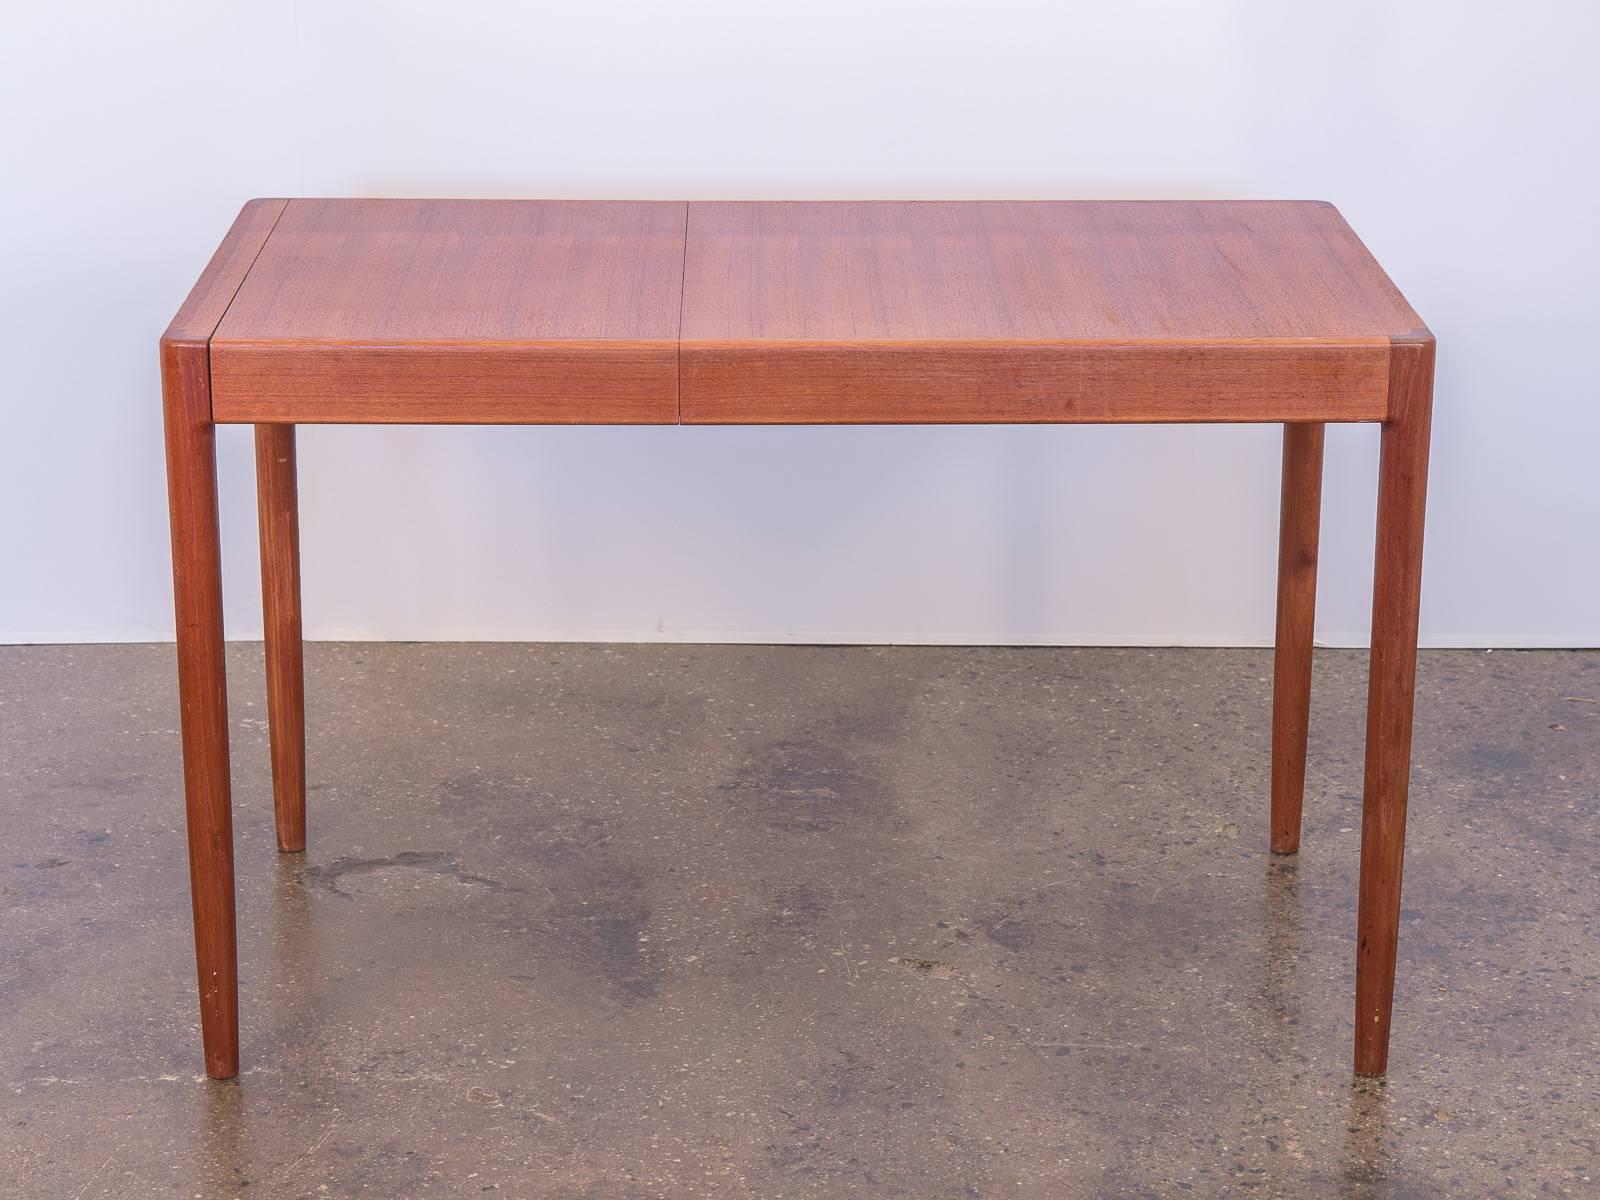 Lovely, compact Danish Modern table with leaf. This gleaming 1960s teak table has been polished, oiled, and cleaned and has a brilliant presence. Surface has some age-appropriate wear, overall in very good vintage condition. Removable leaf allows